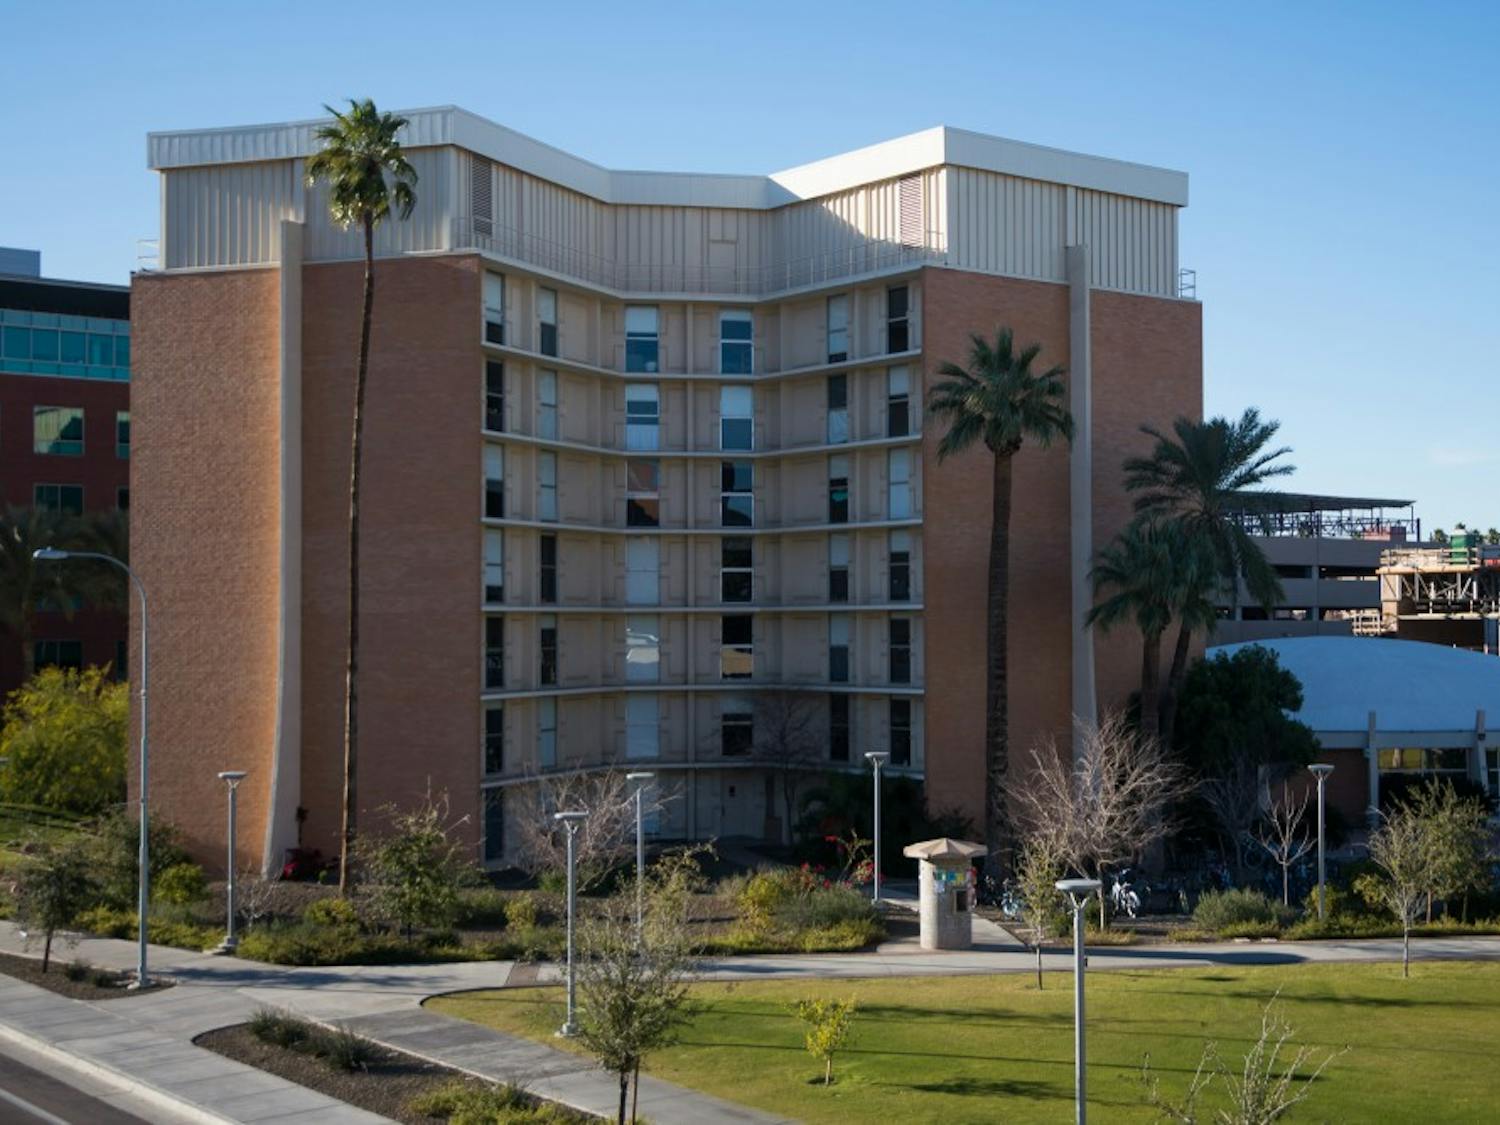 Palo Verde West residential complex is pictured on Friday, Feb. 5, 2016, on University Drive in Tempe. The facility is hosting an early polling location for the City of Tempe’s general election on March 8.